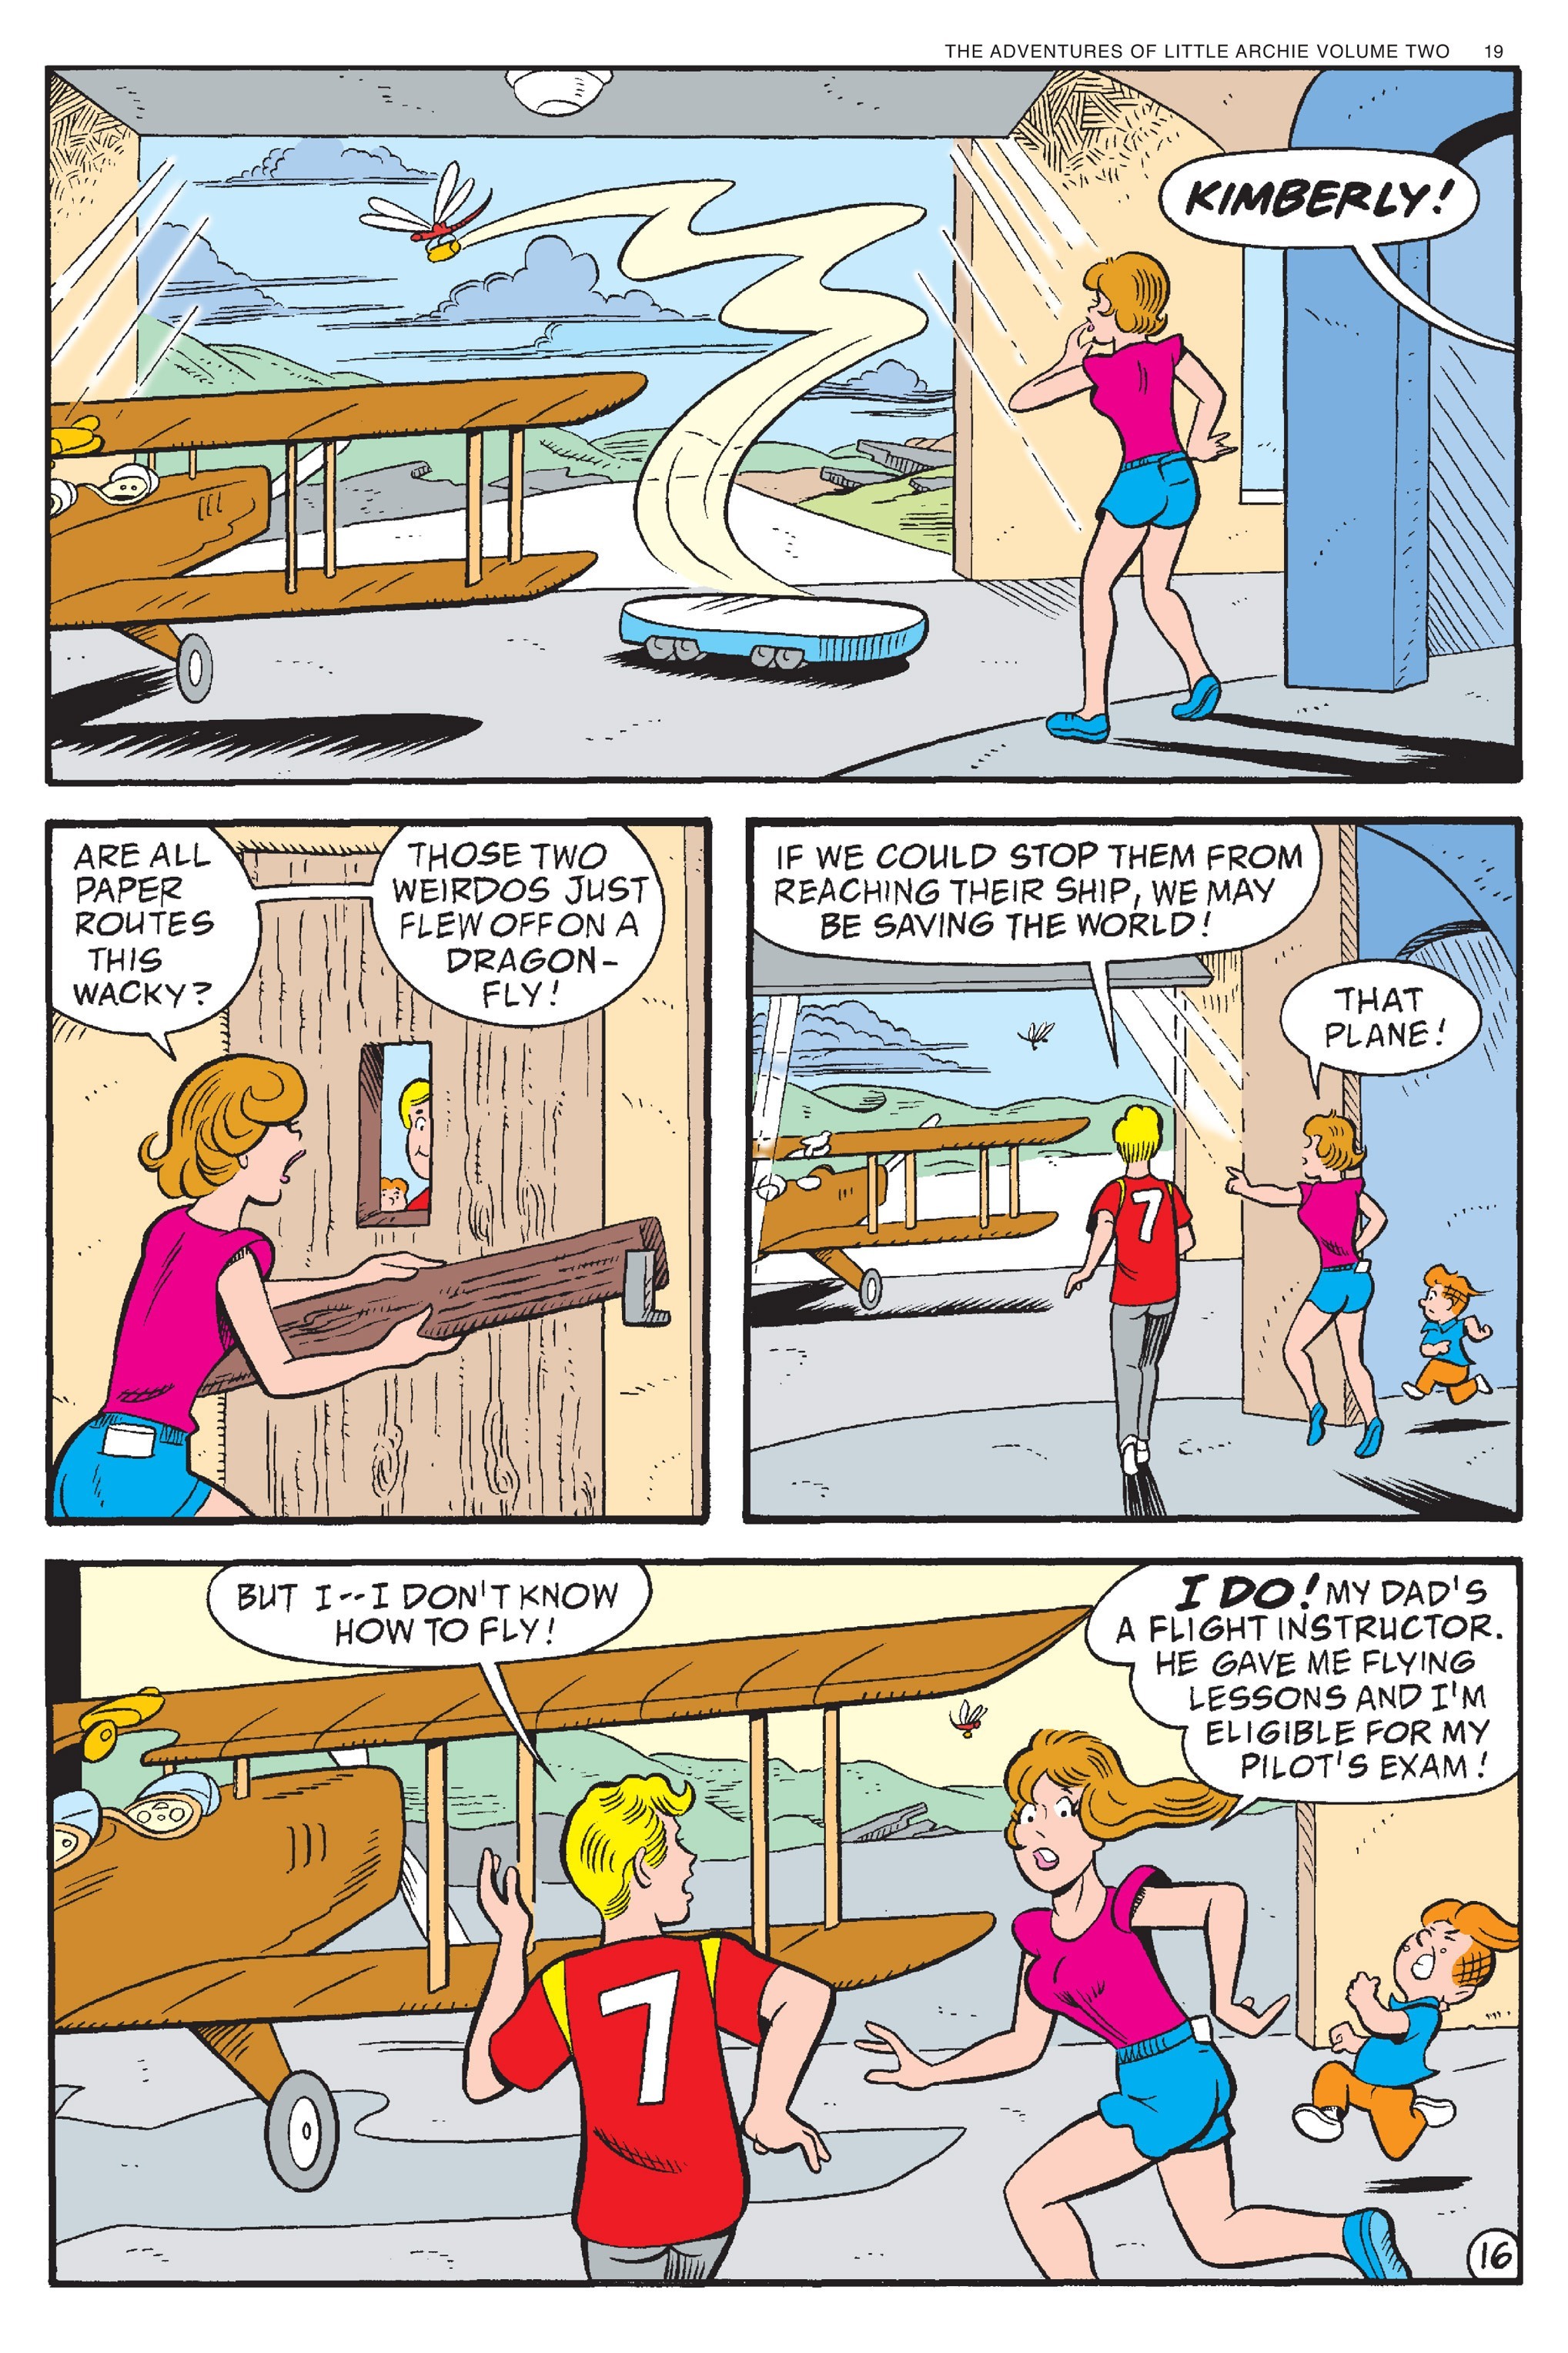 Read online Adventures of Little Archie comic -  Issue # TPB 2 - 20